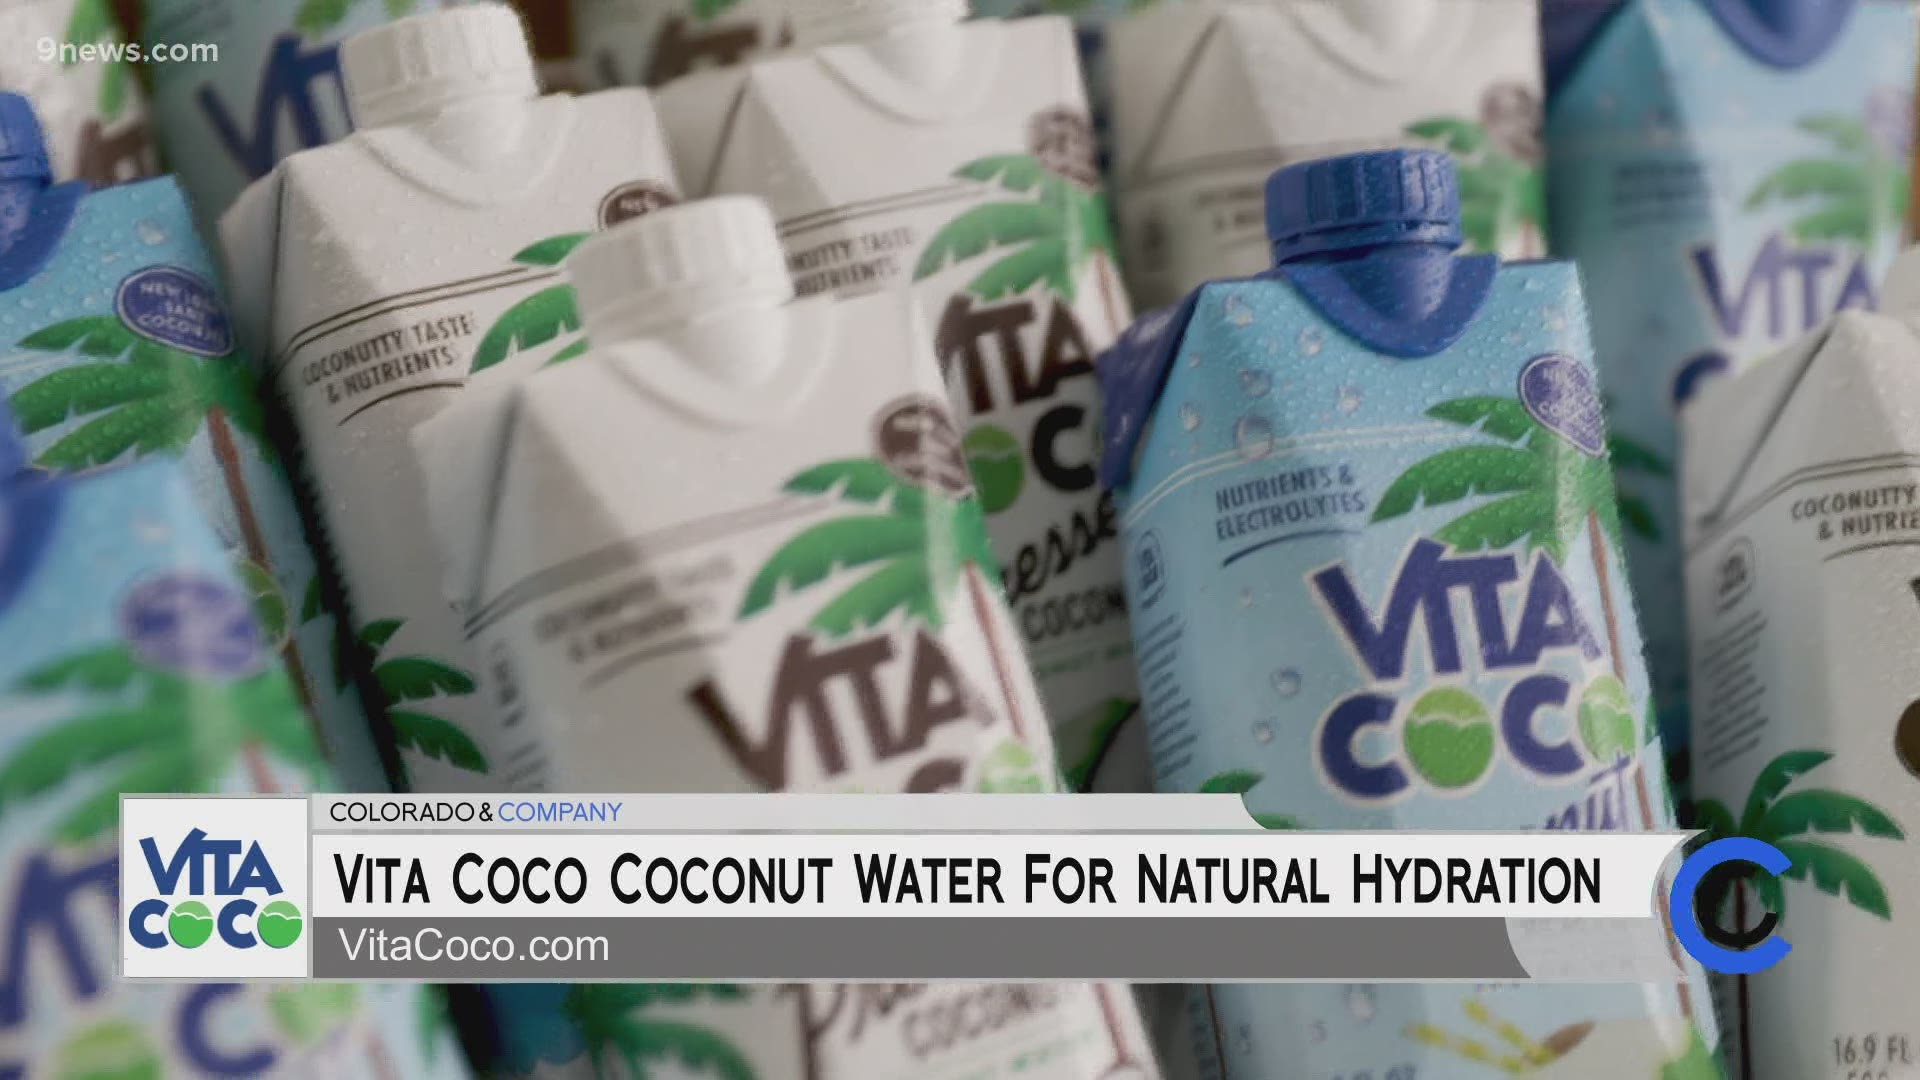 Vita Coco is packed with hydrating electrolytes. Visit ColoradoandCo.com for the recipe and find it at King Soopers, your home for Optimum Wellness.